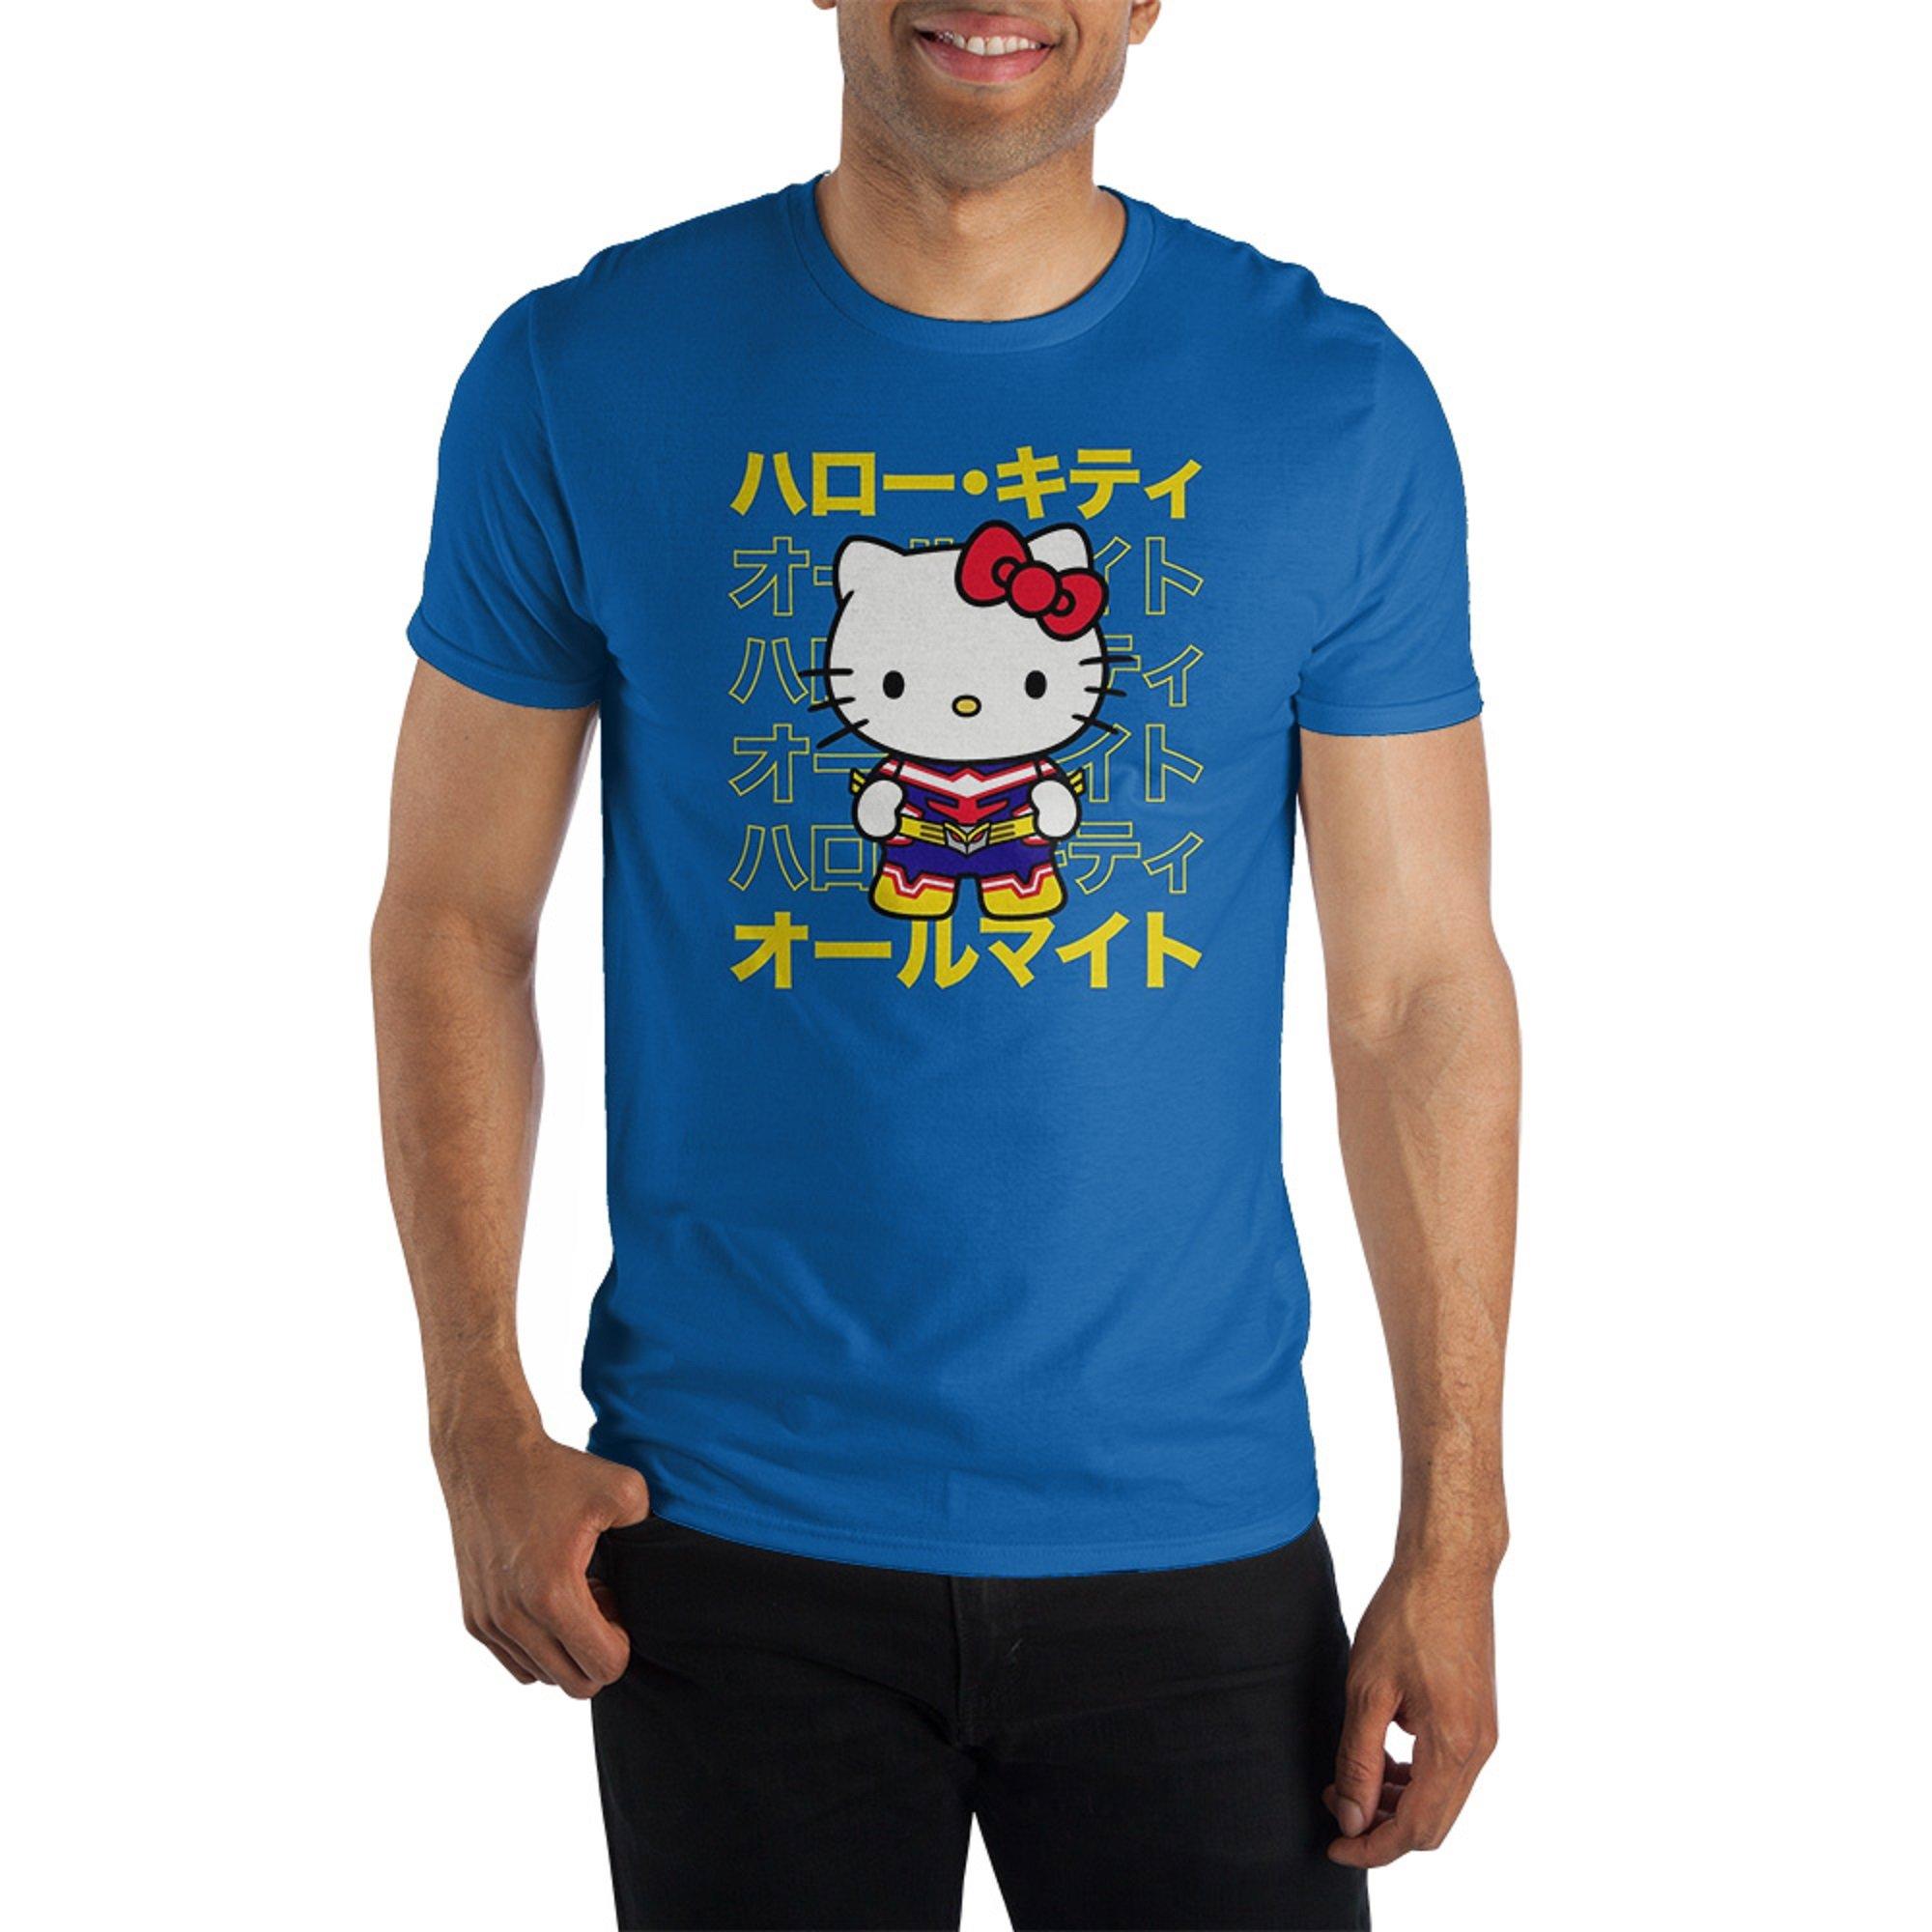 Hello Kitty and My Hero Academia Anime Plus Ultra Men's Royal Unisex Blue Graphic T-Shirt